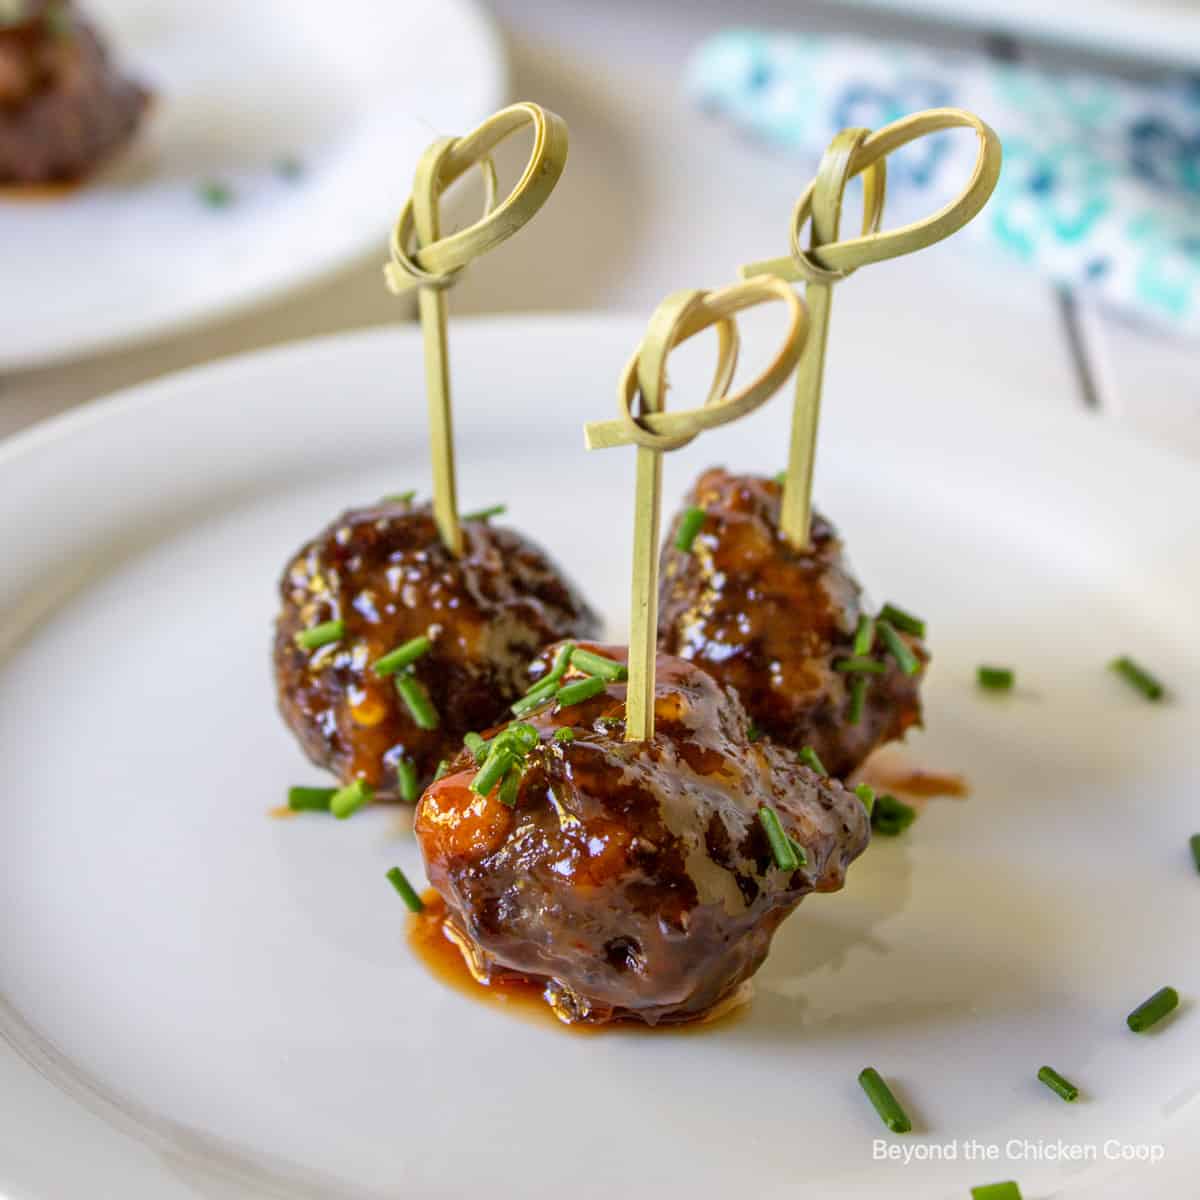 Three small meatballs on a plate.